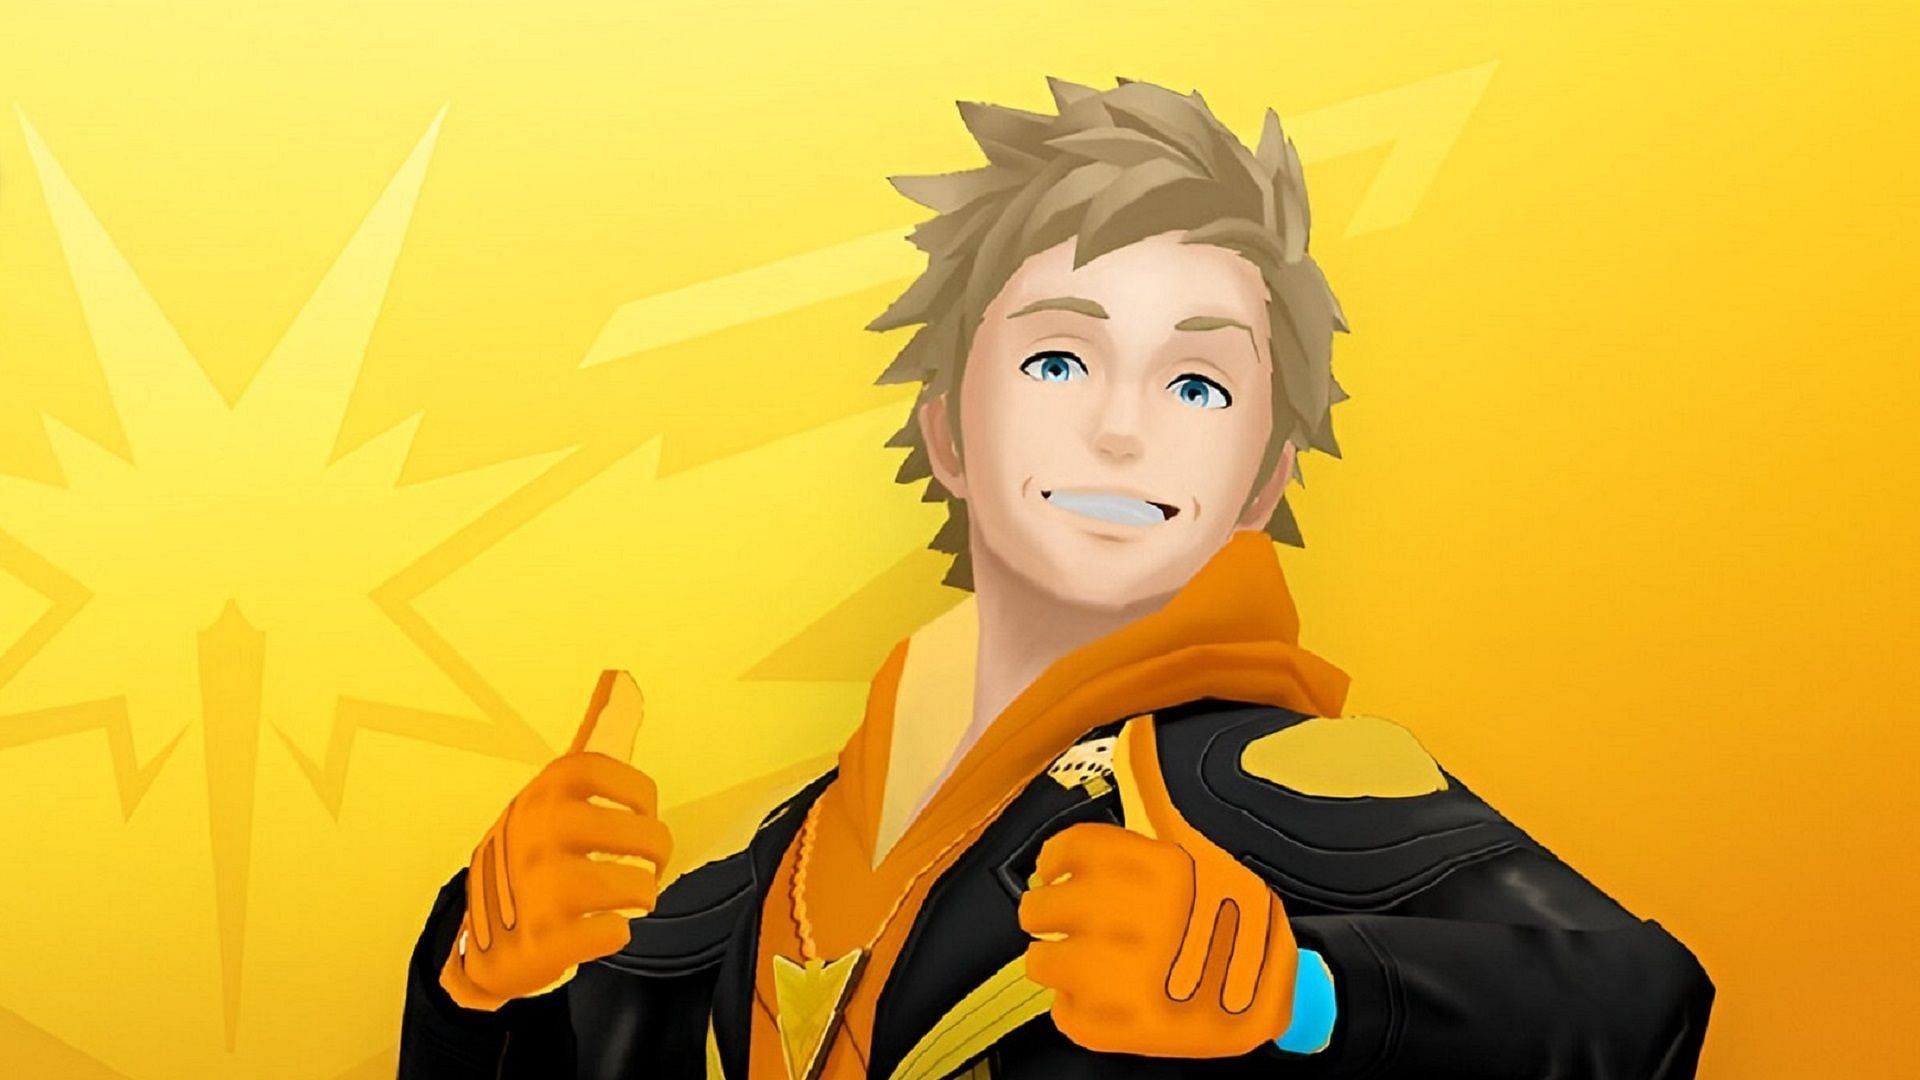 Team Instinct is headed by the eccentric leader Spark in Pokemon GO (Image via Niantic)